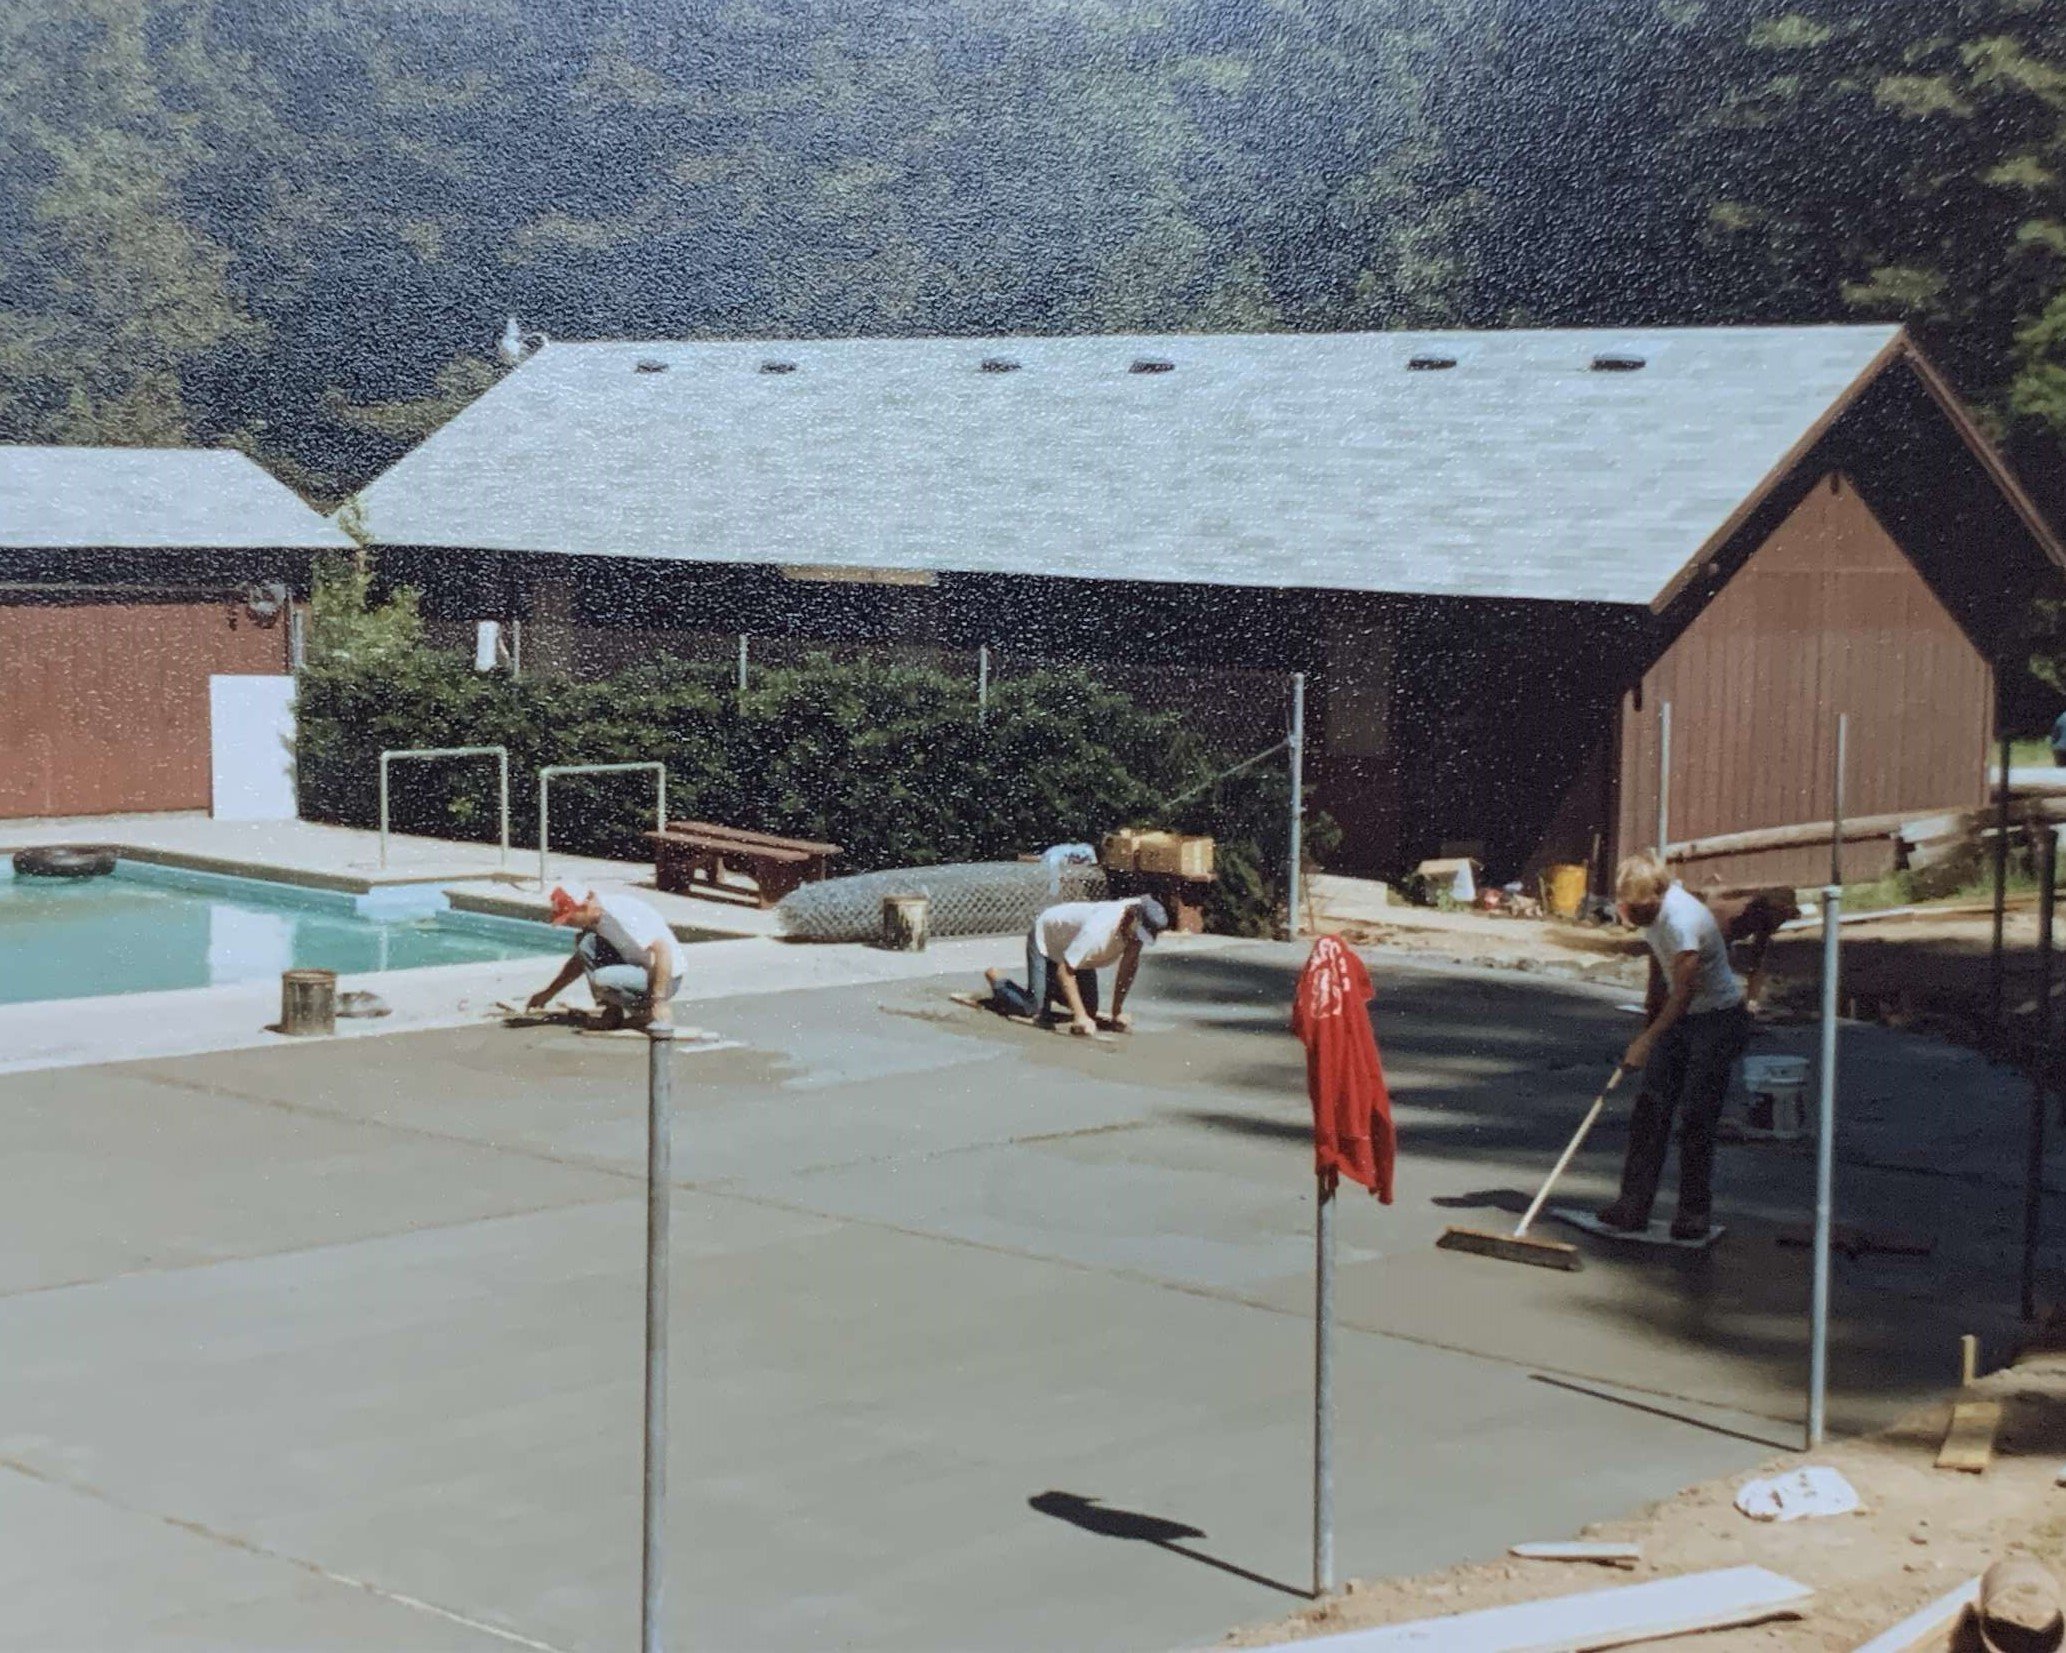 The extension of the pool area in 1980